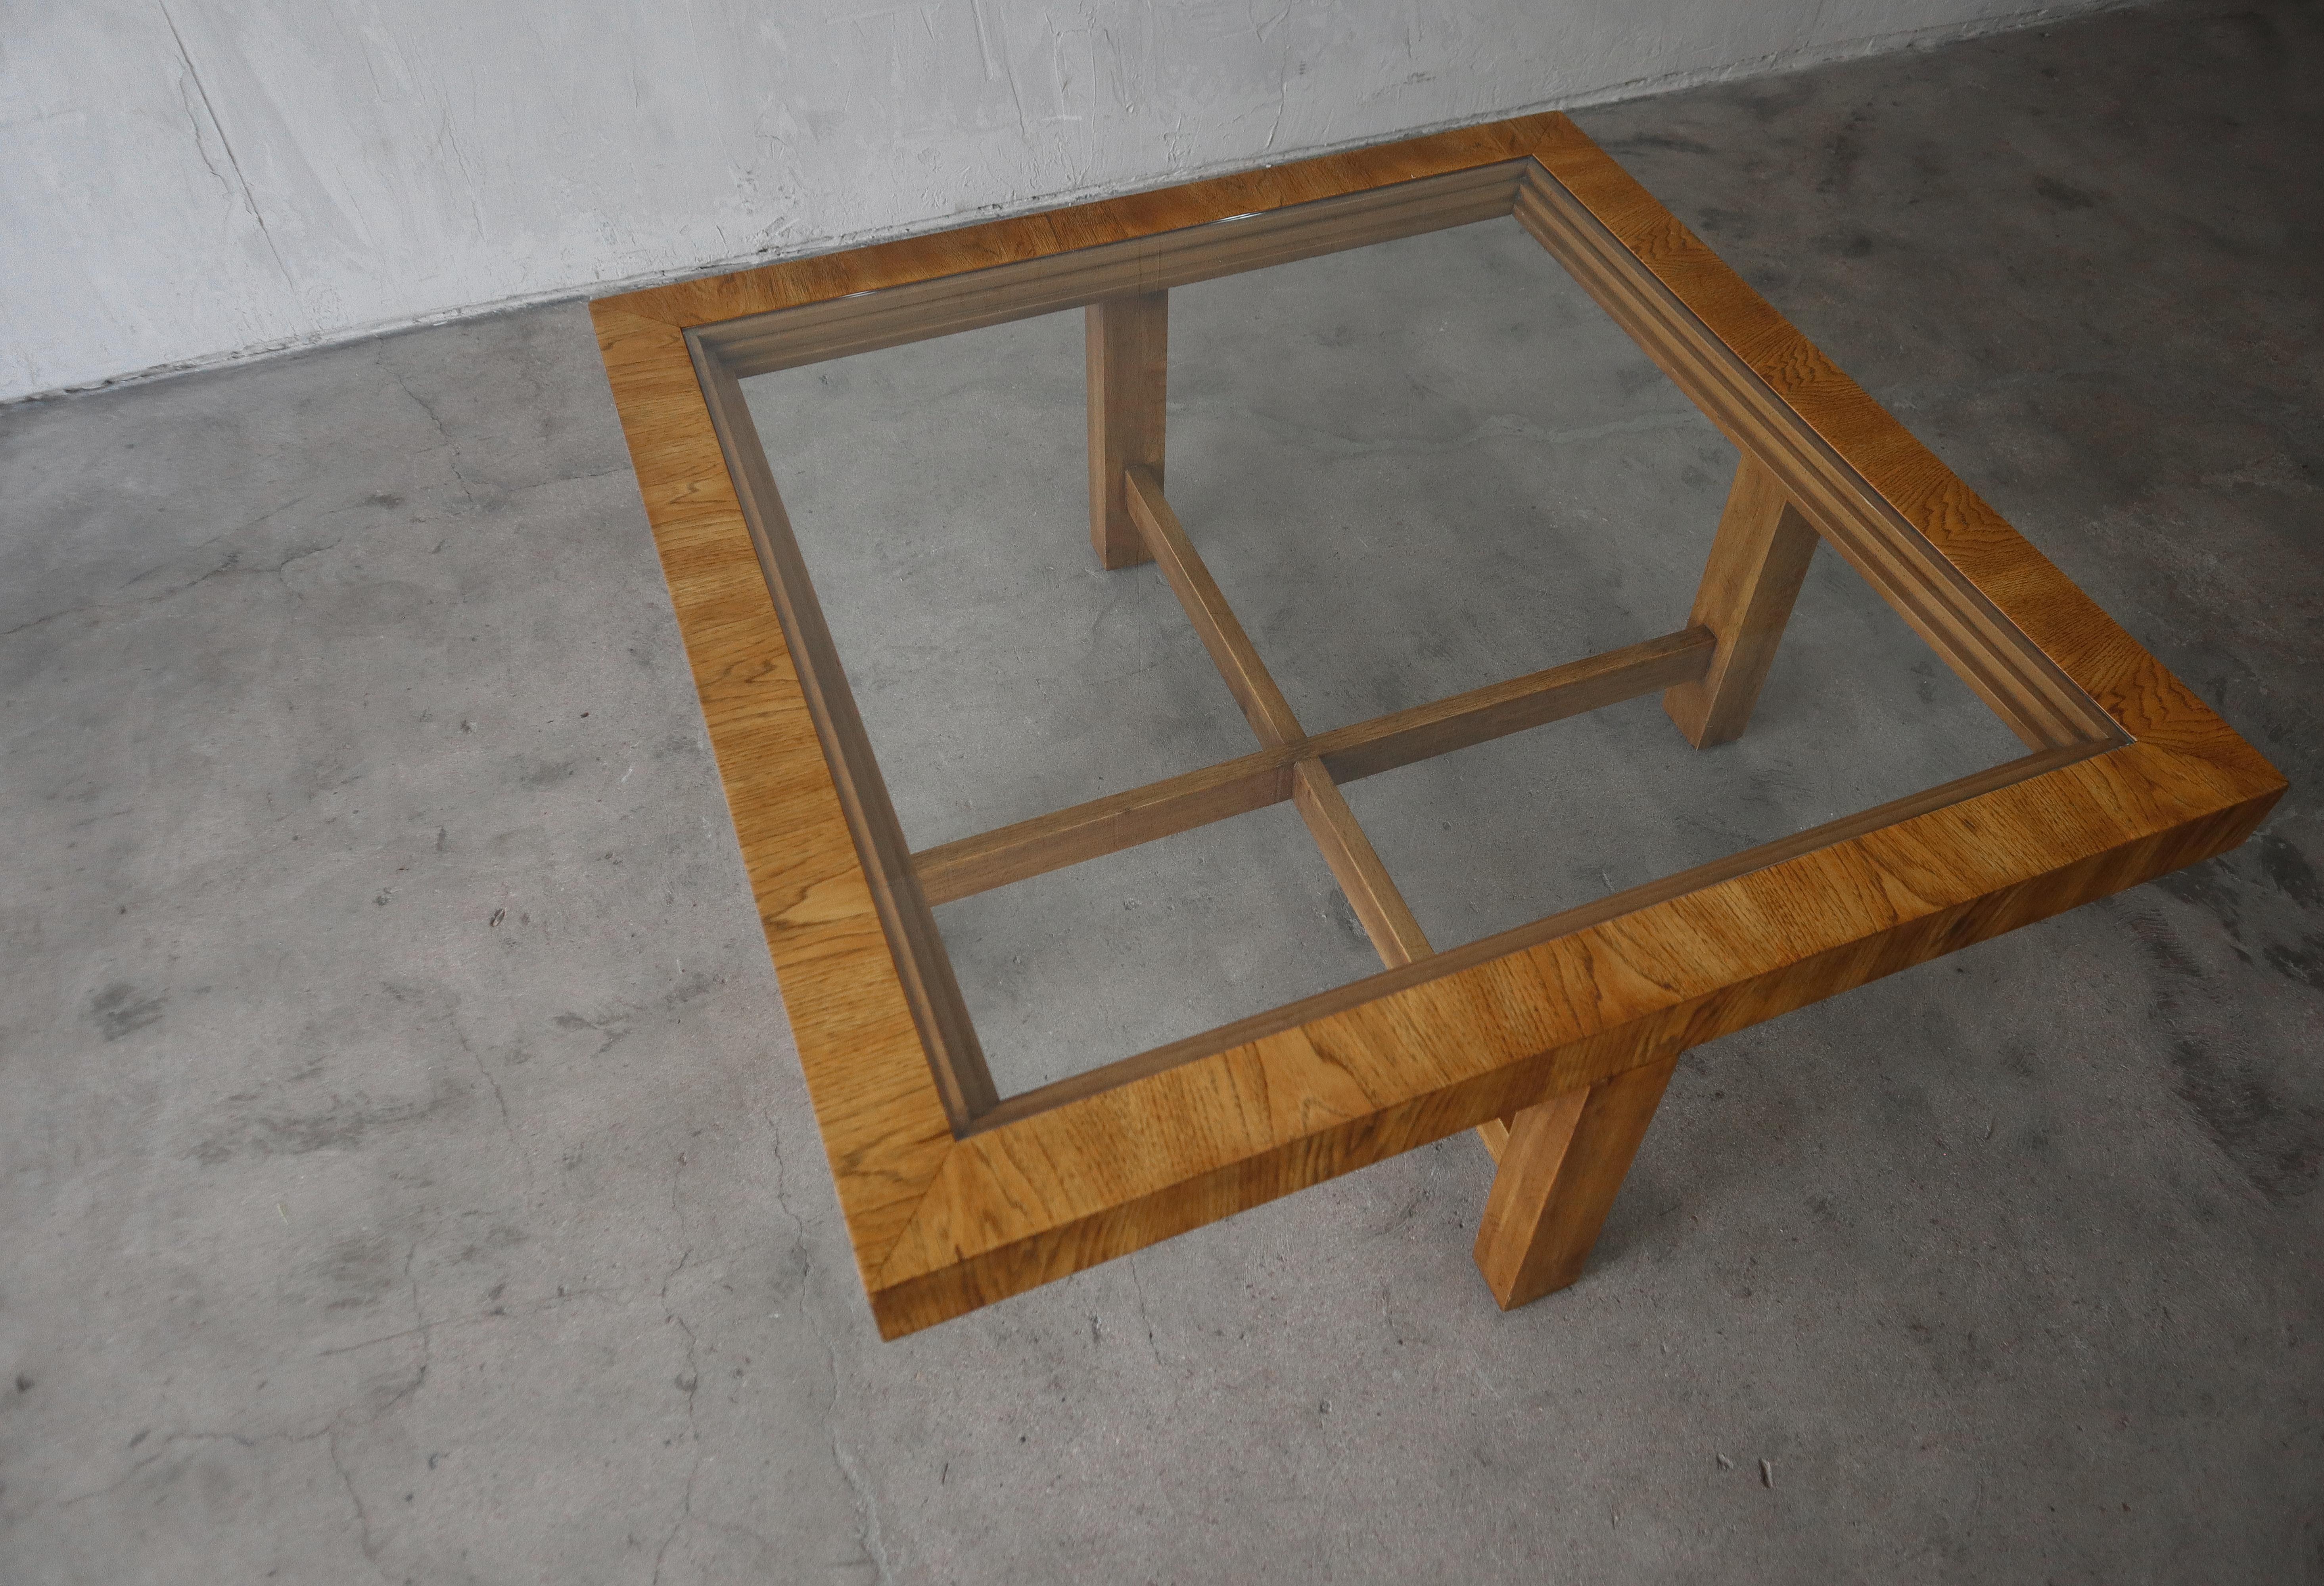 Simple and sophisticated square oak and glass coffee table. Minimal but beautiful. Gorgeous grain and wood details.

Table is in excellent vintage condition with no real damage to be noted. The glass is brand new.

